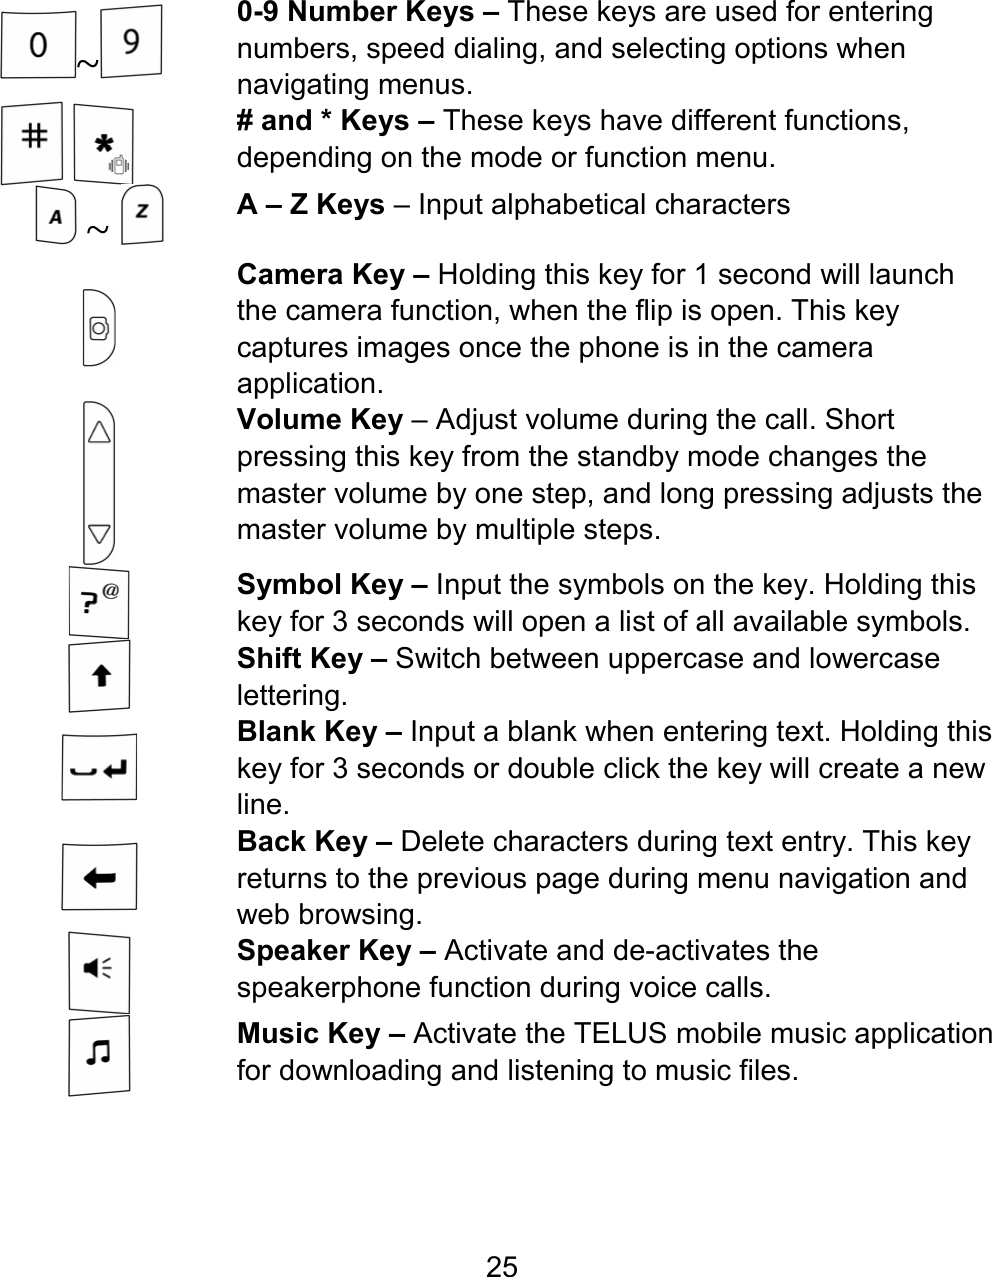 25 ~  0-9 Number Keys – These keys are used for entering numbers, speed dialing, and selecting options when navigating menus.      # and * Keys – These keys have different functions, depending on the mode or function menu.  ~   A – Z Keys – Input alphabetical characters  Camera Key – Holding this key for 1 second will launch the camera function, when the flip is open. This key captures images once the phone is in the camera application.     Volume Key – Adjust volume during the call. Short pressing this key from the standby mode changes the master volume by one step, and long pressing adjusts the master volume by multiple steps.   Symbol Key – Input the symbols on the key. Holding this key for 3 seconds will open a list of all available symbols.  Shift Key – Switch between uppercase and lowercase lettering.  Blank Key – Input a blank when entering text. Holding this key for 3 seconds or double click the key will create a new line.  Back Key – Delete characters during text entry. This key returns to the previous page during menu navigation and web browsing.  Speaker Key – Activate and de-activates the speakerphone function during voice calls.  Music Key – Activate the TELUS mobile music application for downloading and listening to music files. 